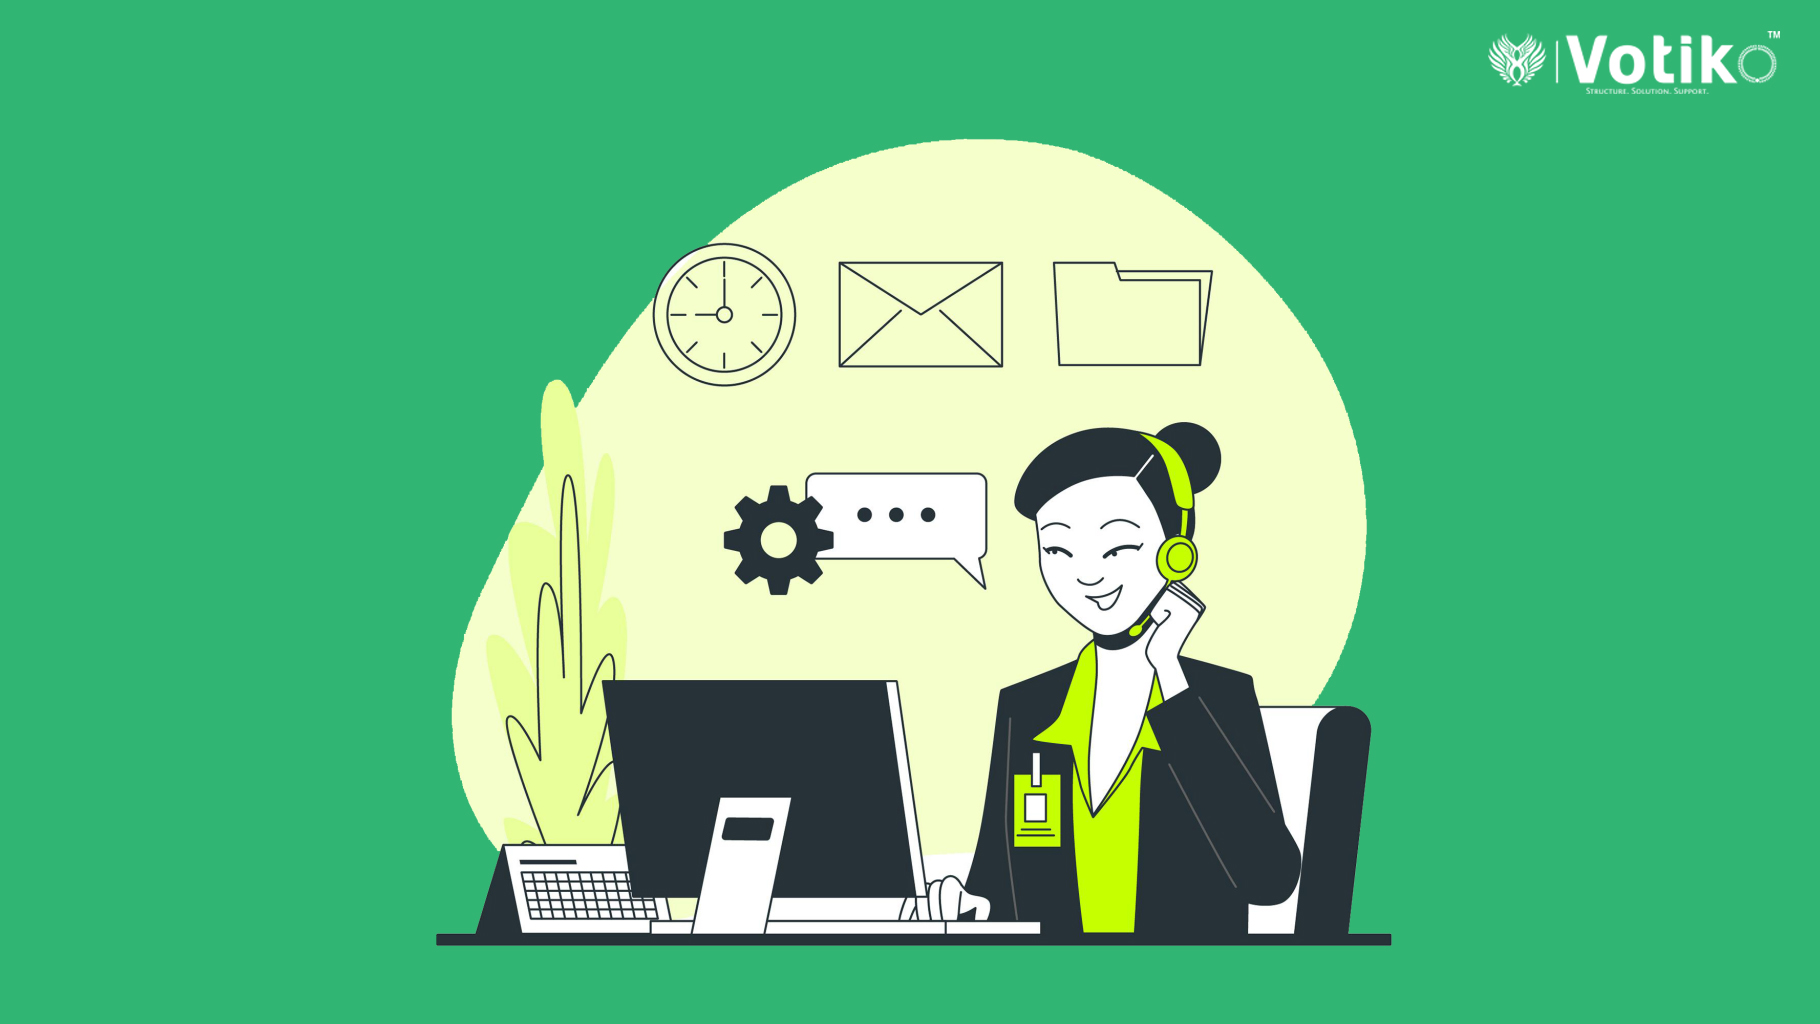 Votiko’s Virtual Assistant Services: The Key to Expanding Your Company